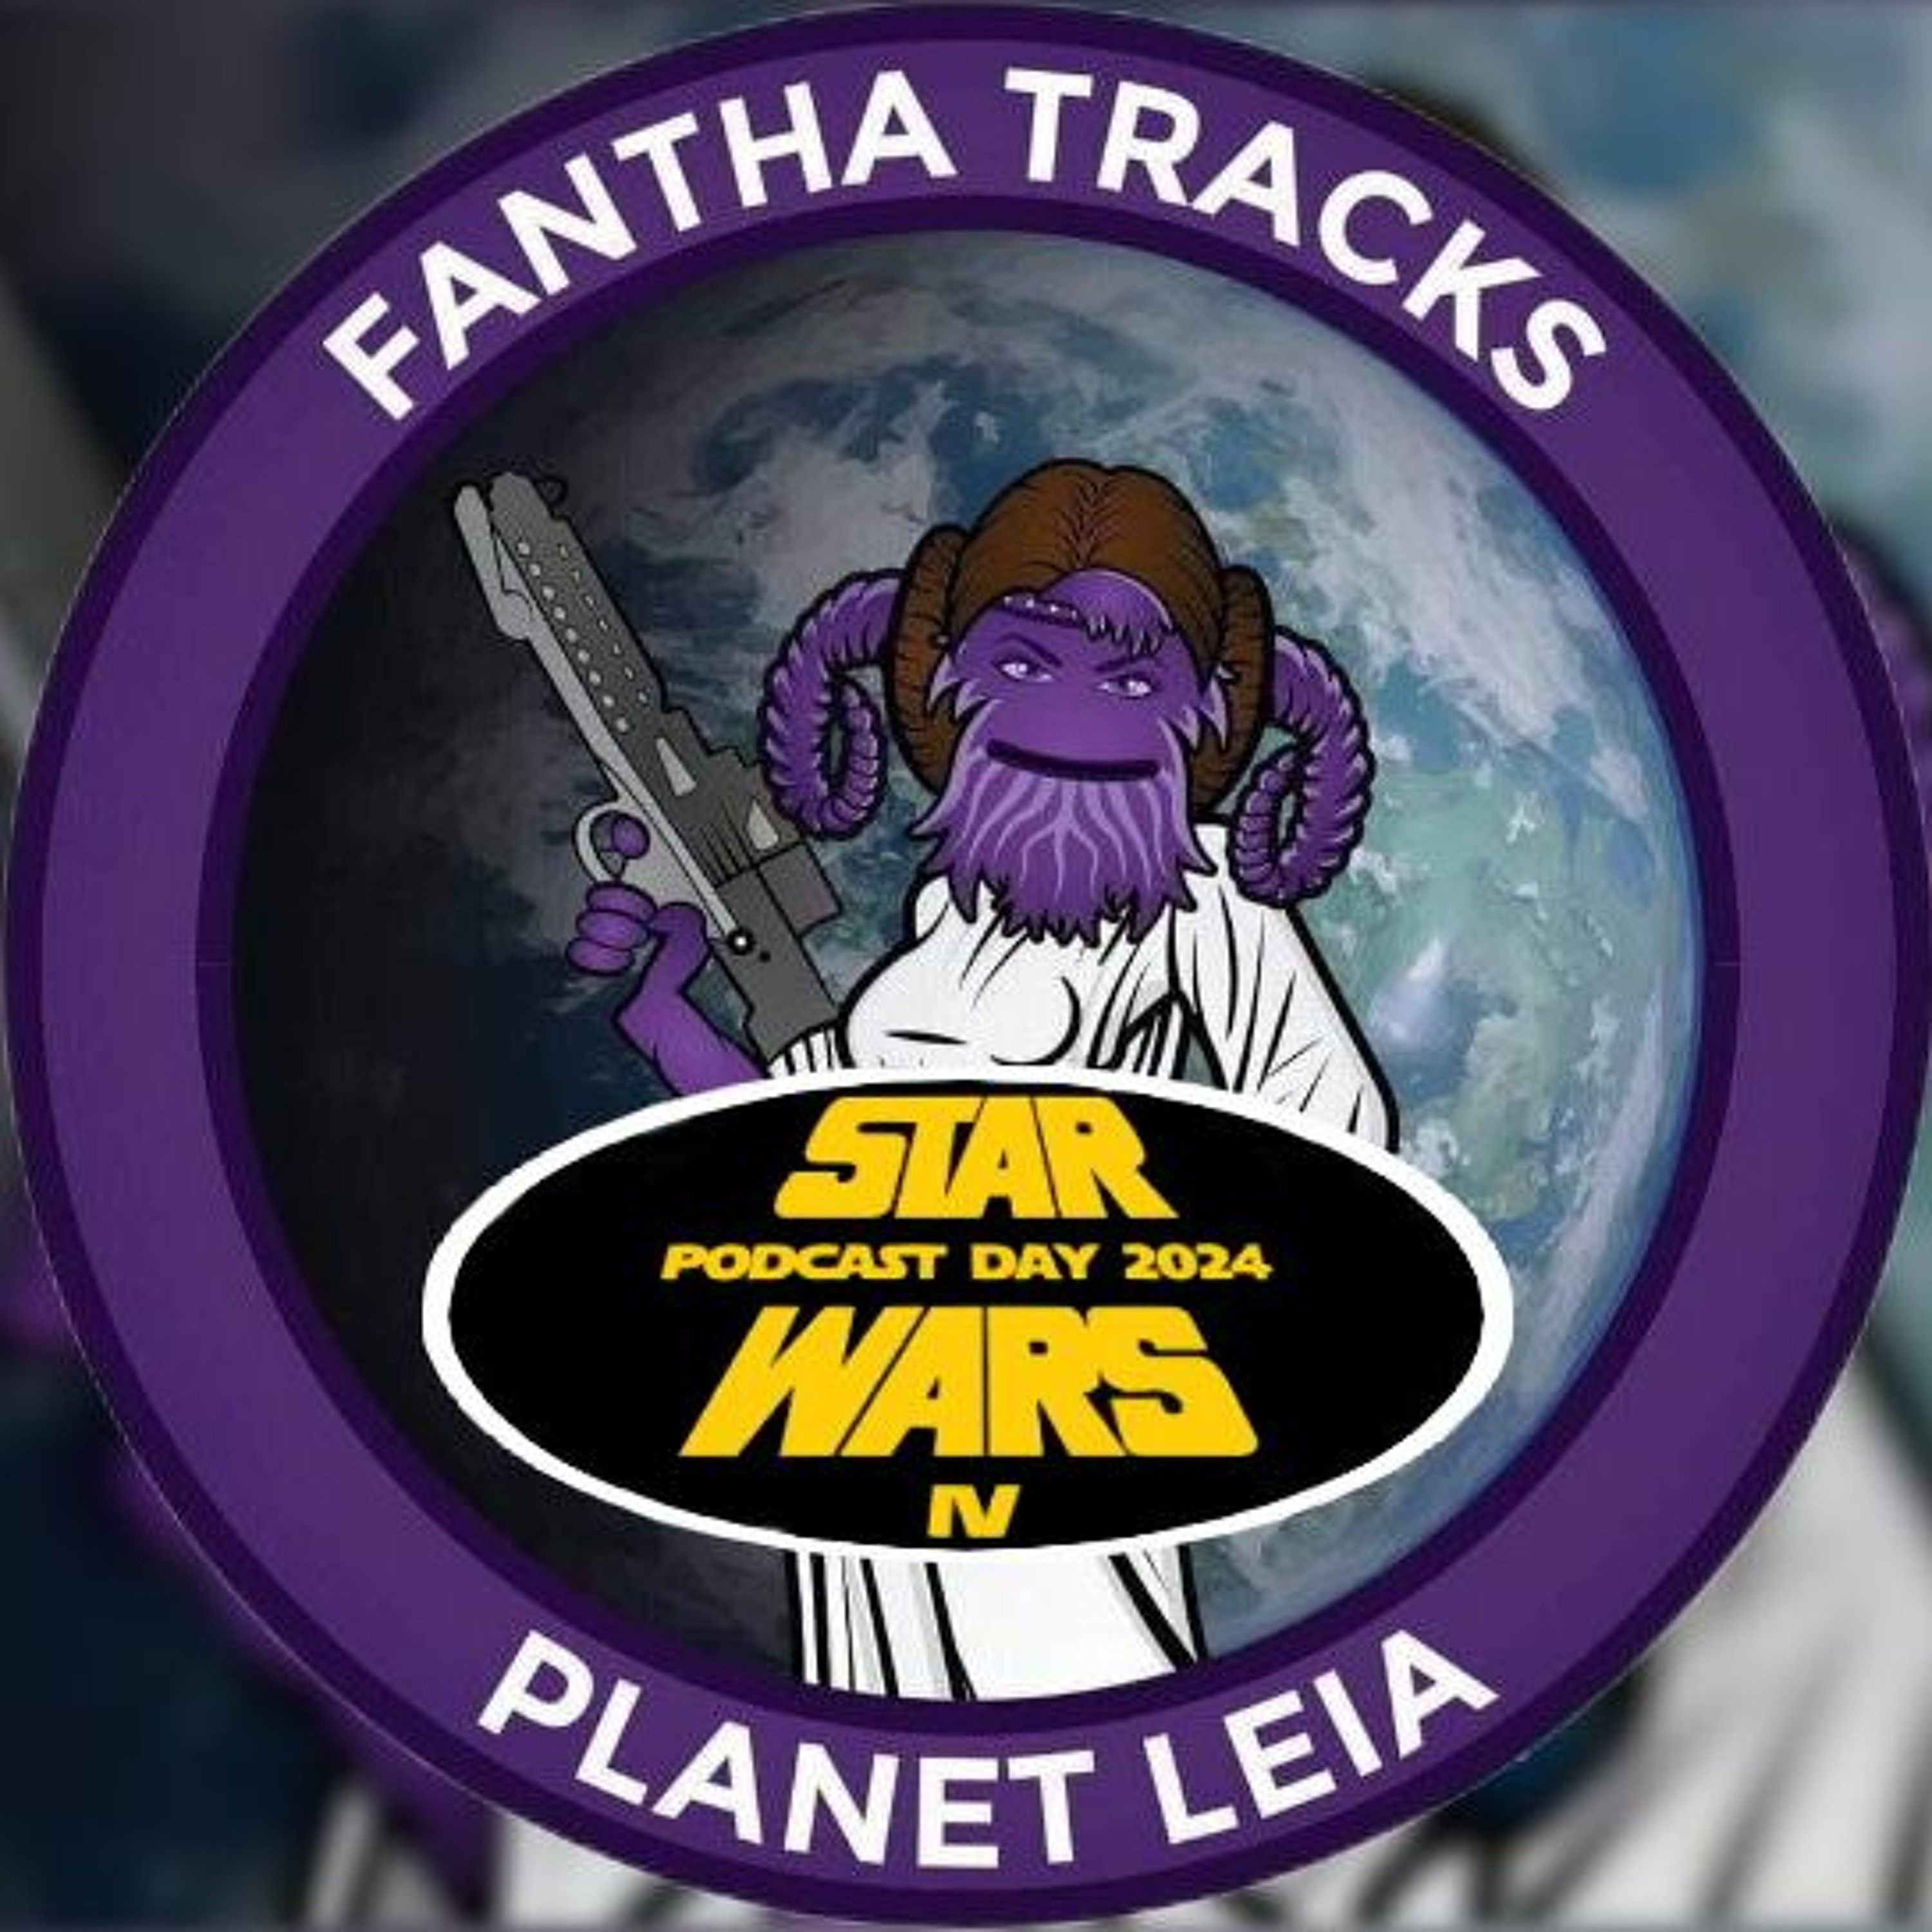 Planet Leia Rebel Briefing: Hutt Couture - Star Wars Podcast Day 2024